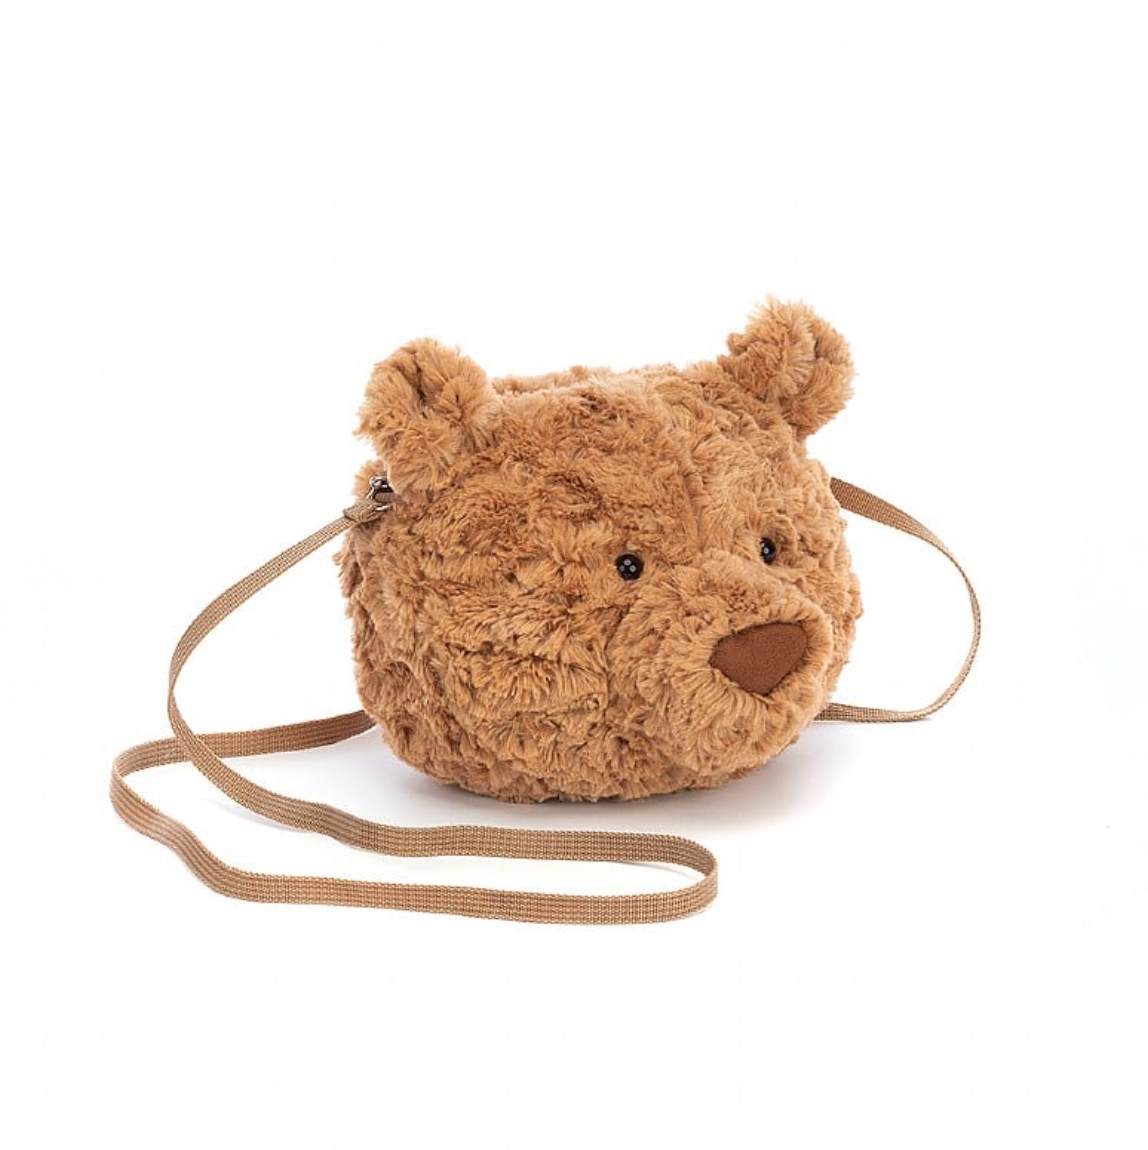 A Bart Bear Bag by Jelly Cat Inc., with a crossbody strap, featuring a cute face with button eyes and a small nose, set against an Arizona-style background.